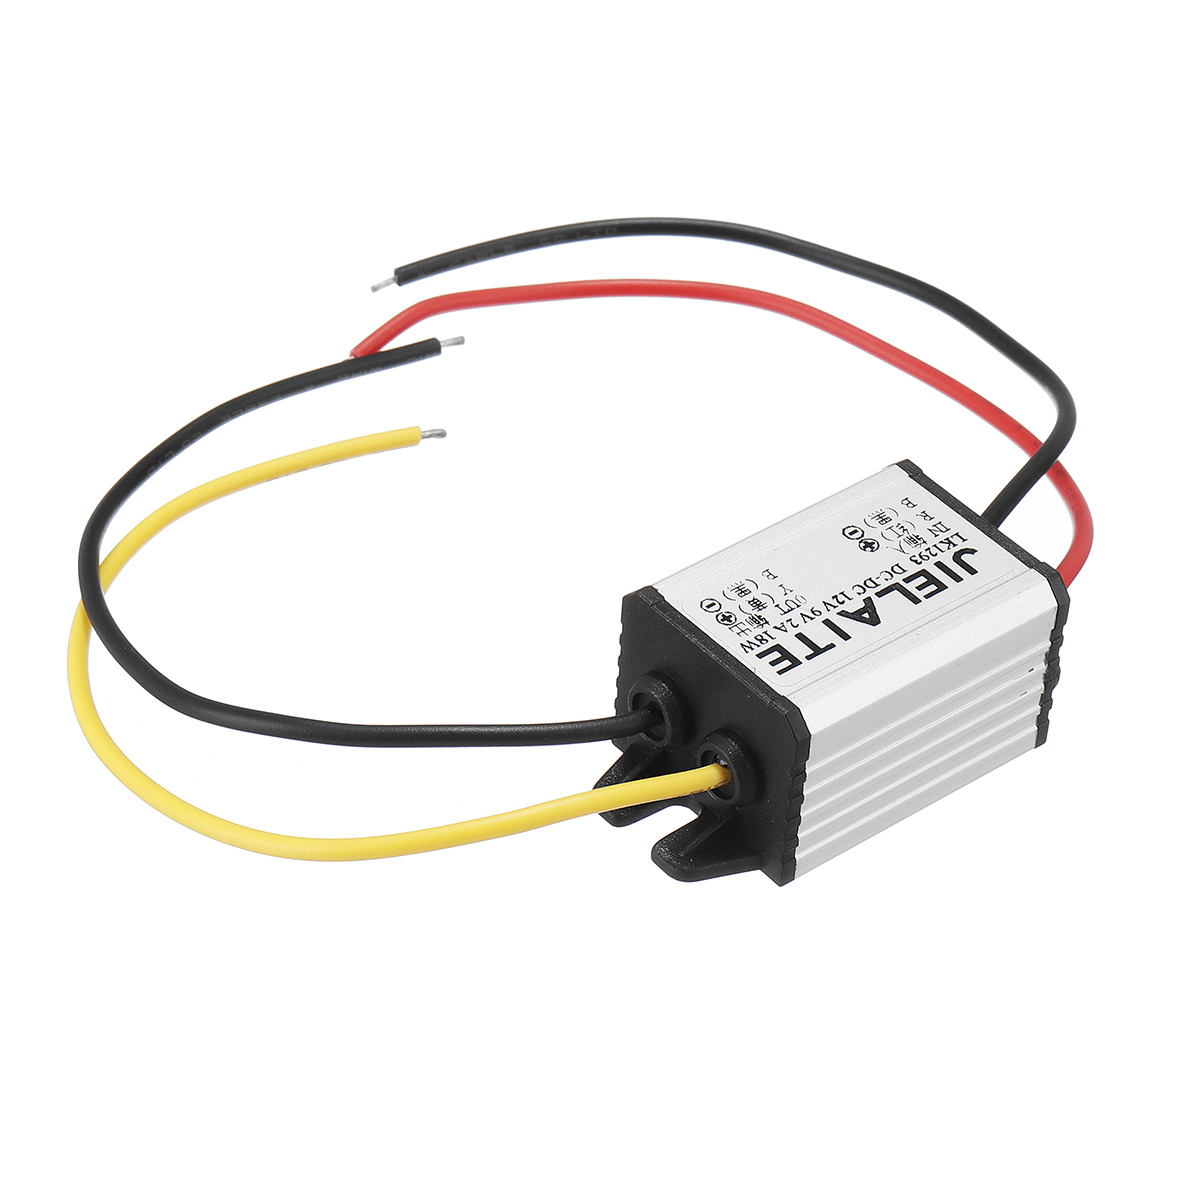 DC 12V to 3.3V 3A Power Adapter Converter Module for Car Boat 